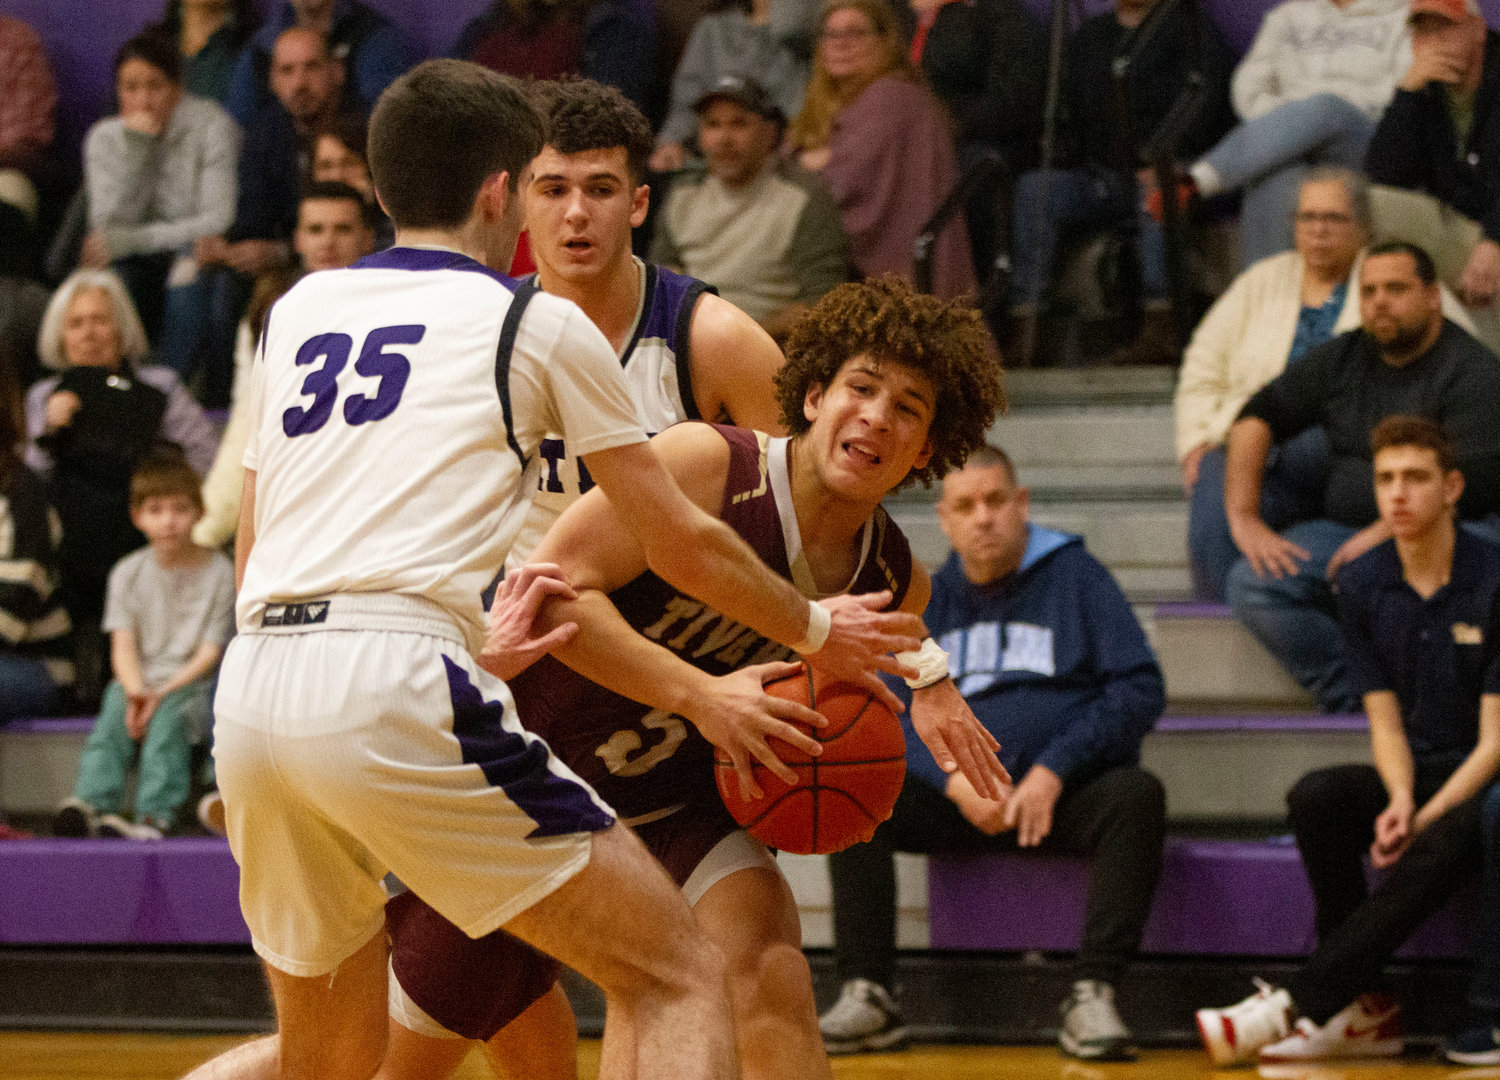 James Rustici (left) and Parker Camelo surround Tristin White as he tries to get to the hoop.